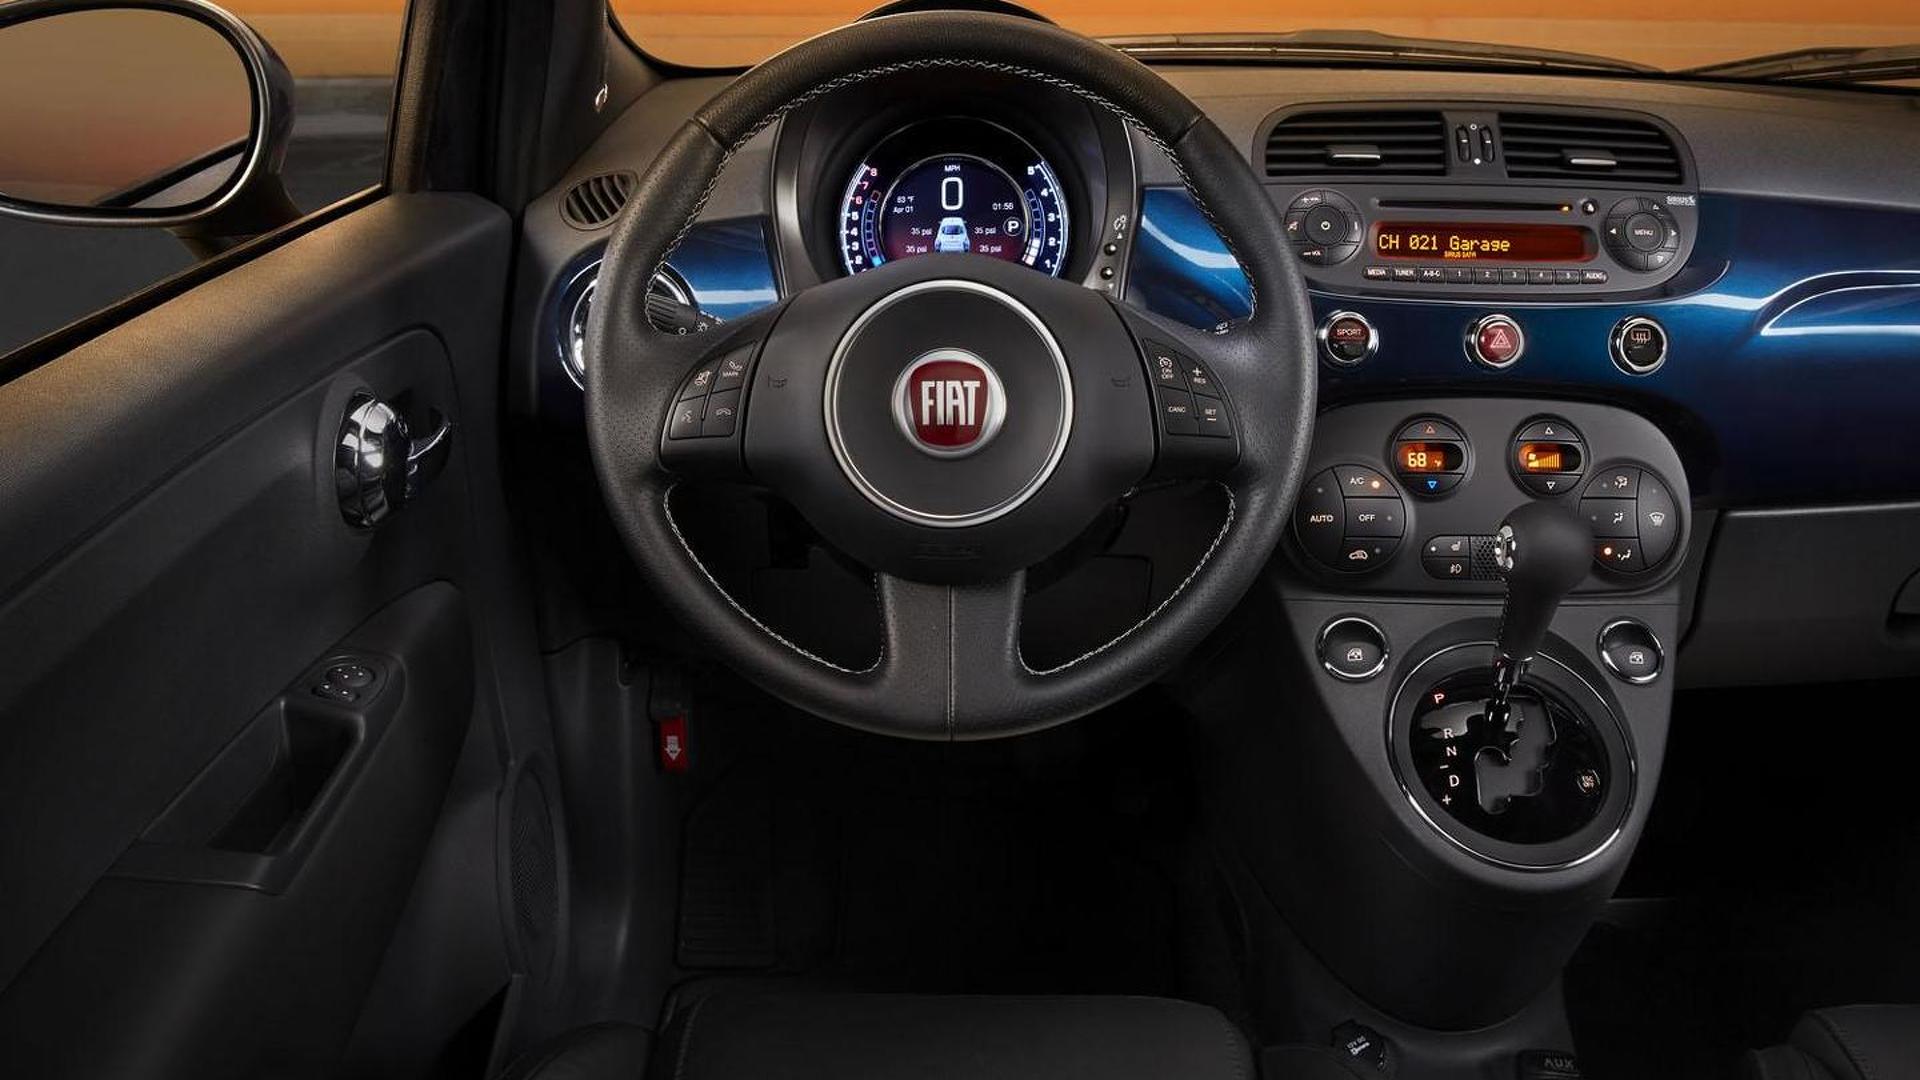 2015 FIAT 500 Pictures, Prices and Reviews - Driverbase